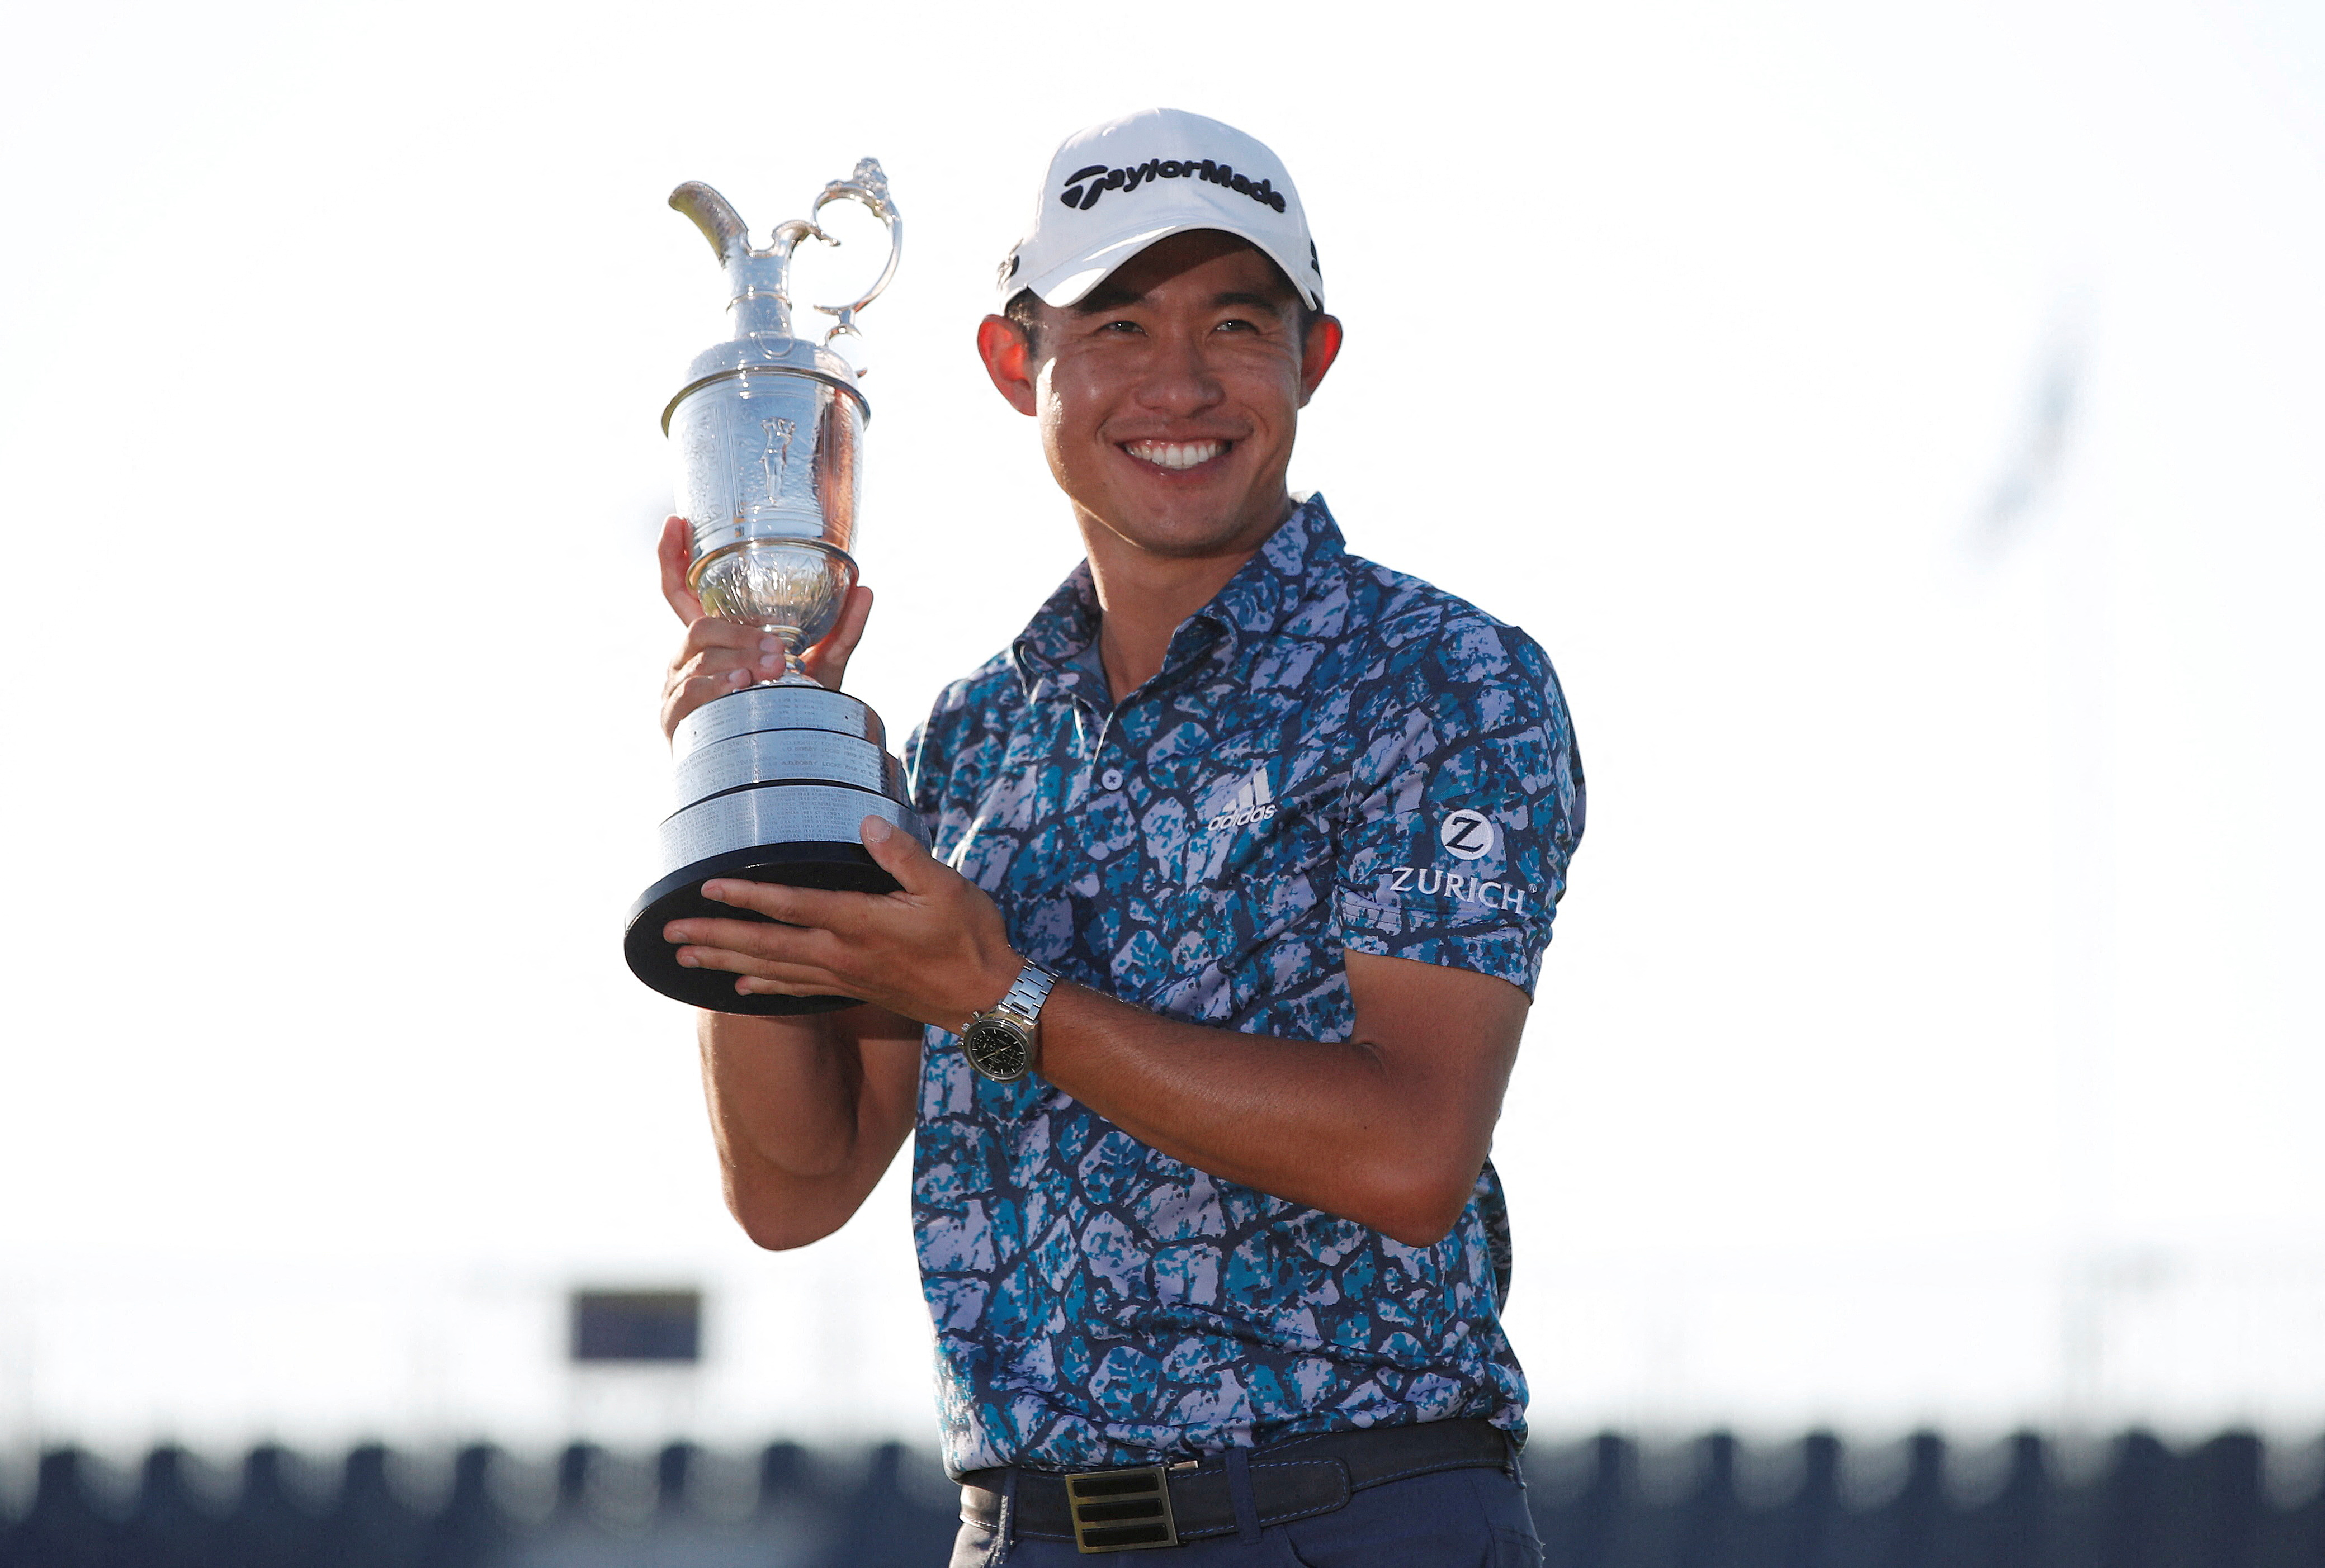 FILE PHOTO: Golf - The 149th Open Championship - Royal St George's, Sandwich, Britain - July 18, 2021 Collin Morikawa of the U.S. celebrates with the Claret Jug after winning The Open Championship REUTERS/Paul Childs/File Photo